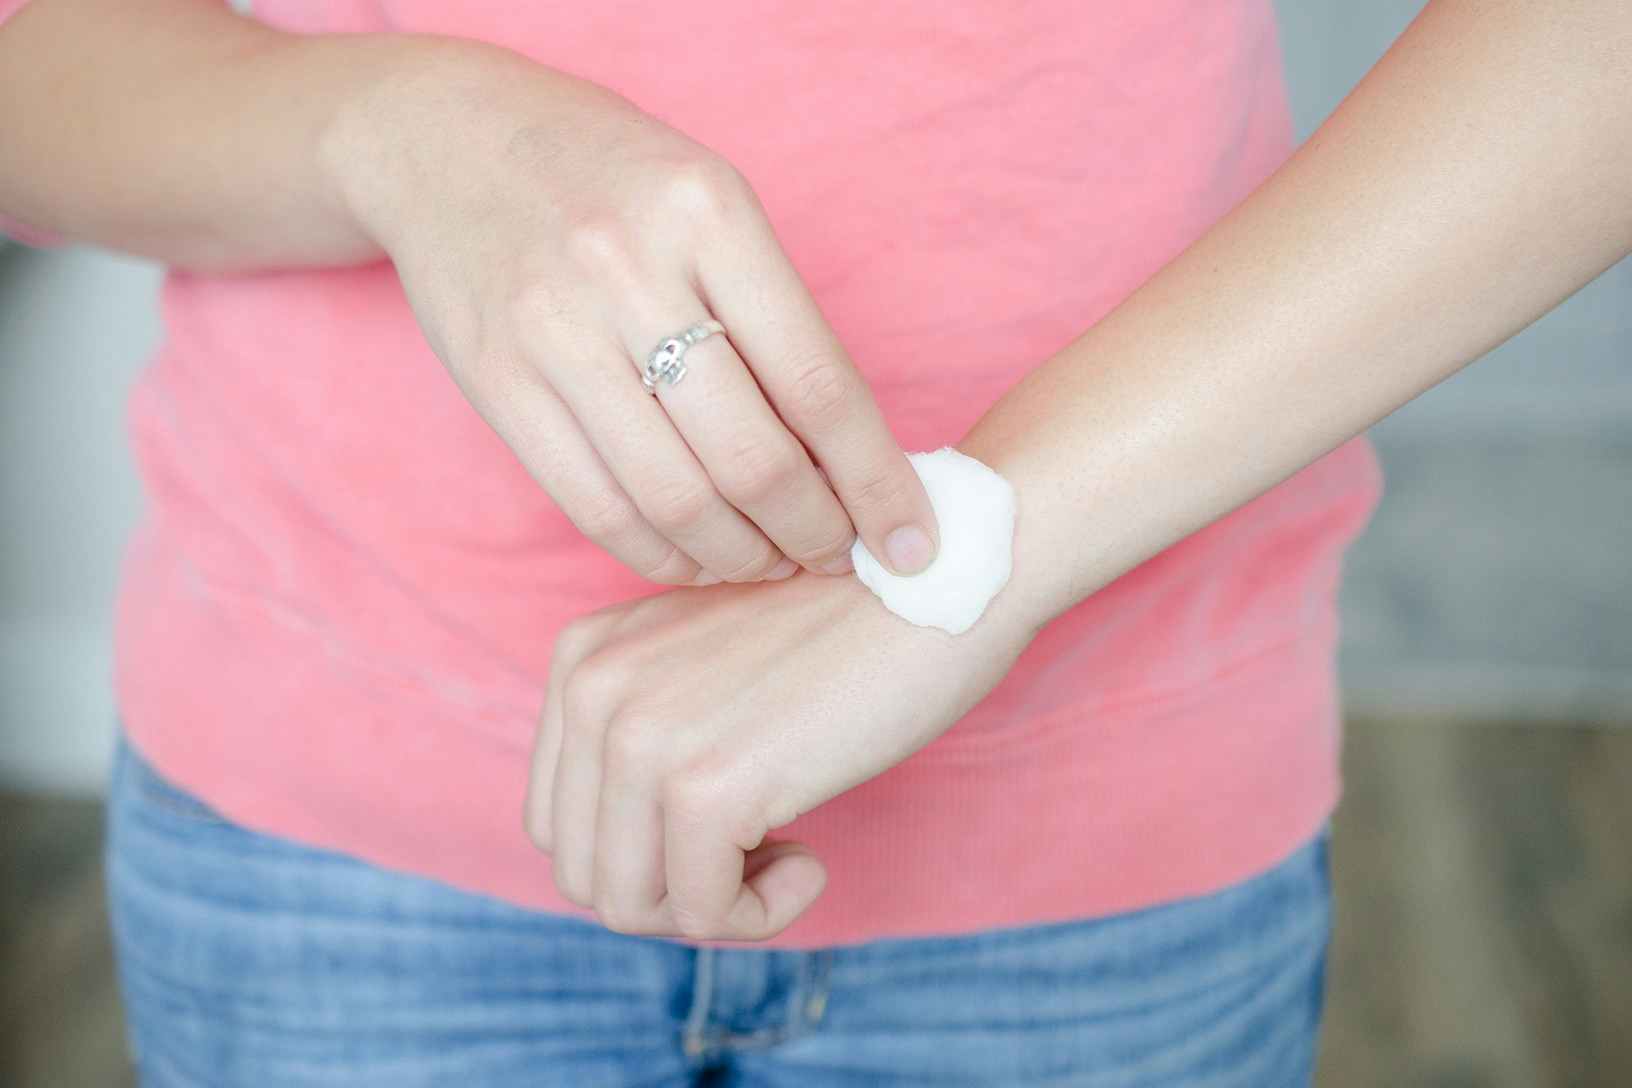 Woman applying a cotton ball to her arm